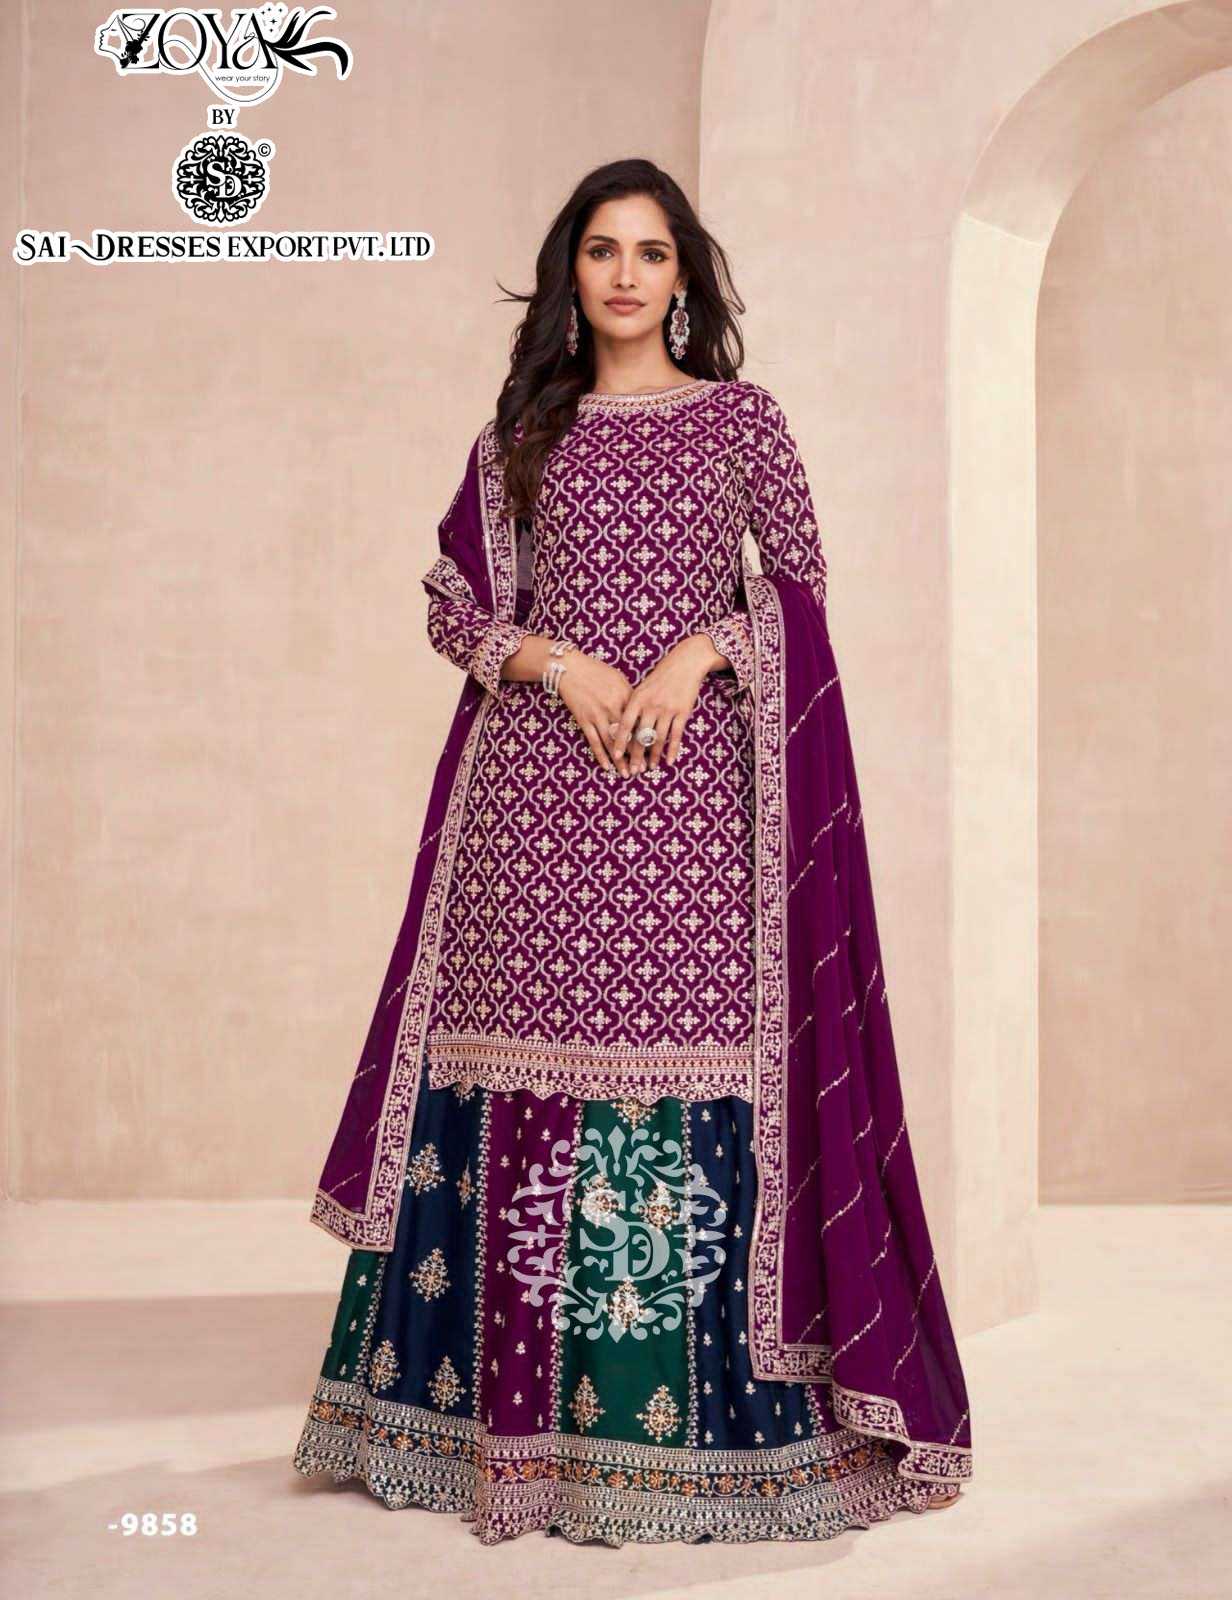 SAI DRESSES PRESENT COLORS DARK EDITION READYMADE EXCLUSIVE WEDDING WEAR STRAIGHT CUT WITH SKIRT STYLE HEAVY DESIGNER SUITS IN WHOLESALE RATE IN SURAT